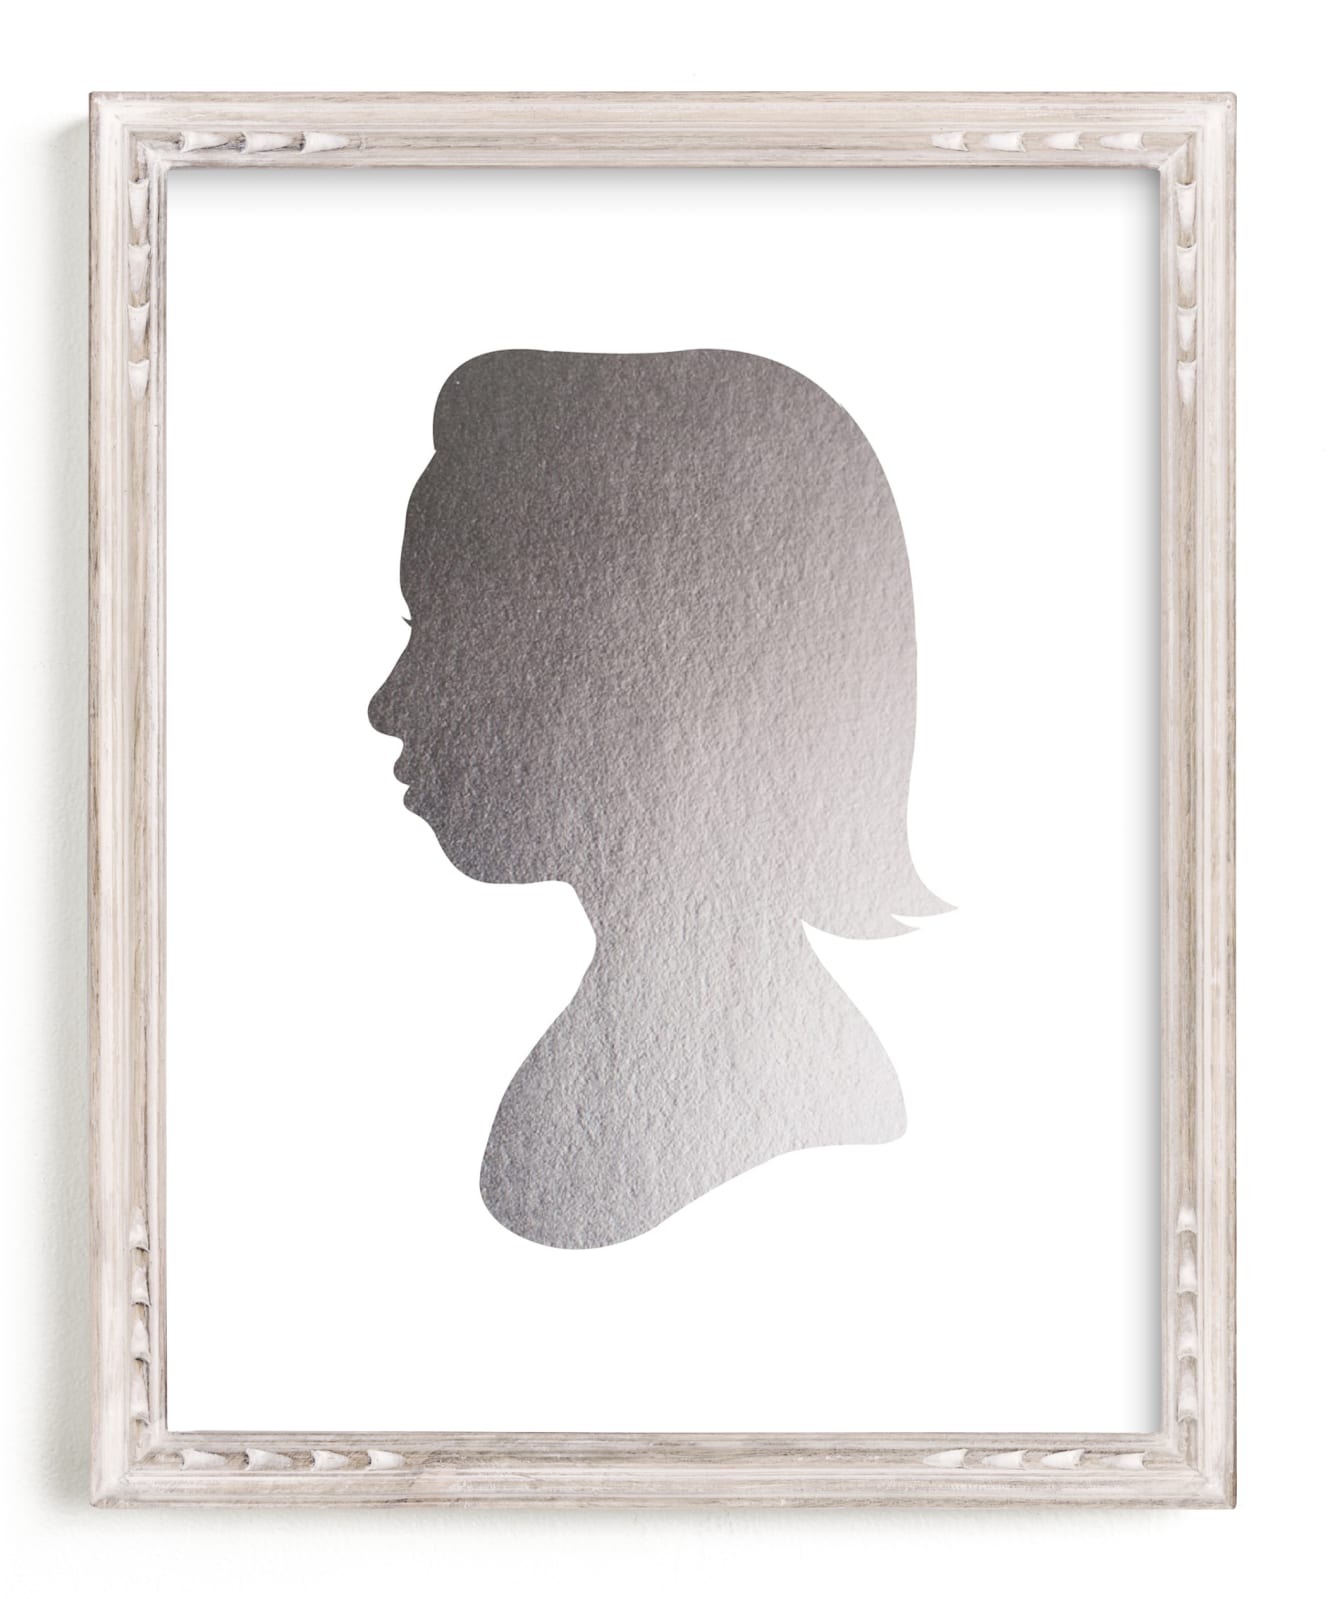 This is a silver silhouette art by Minted called Custom Silhouette Foil Art.